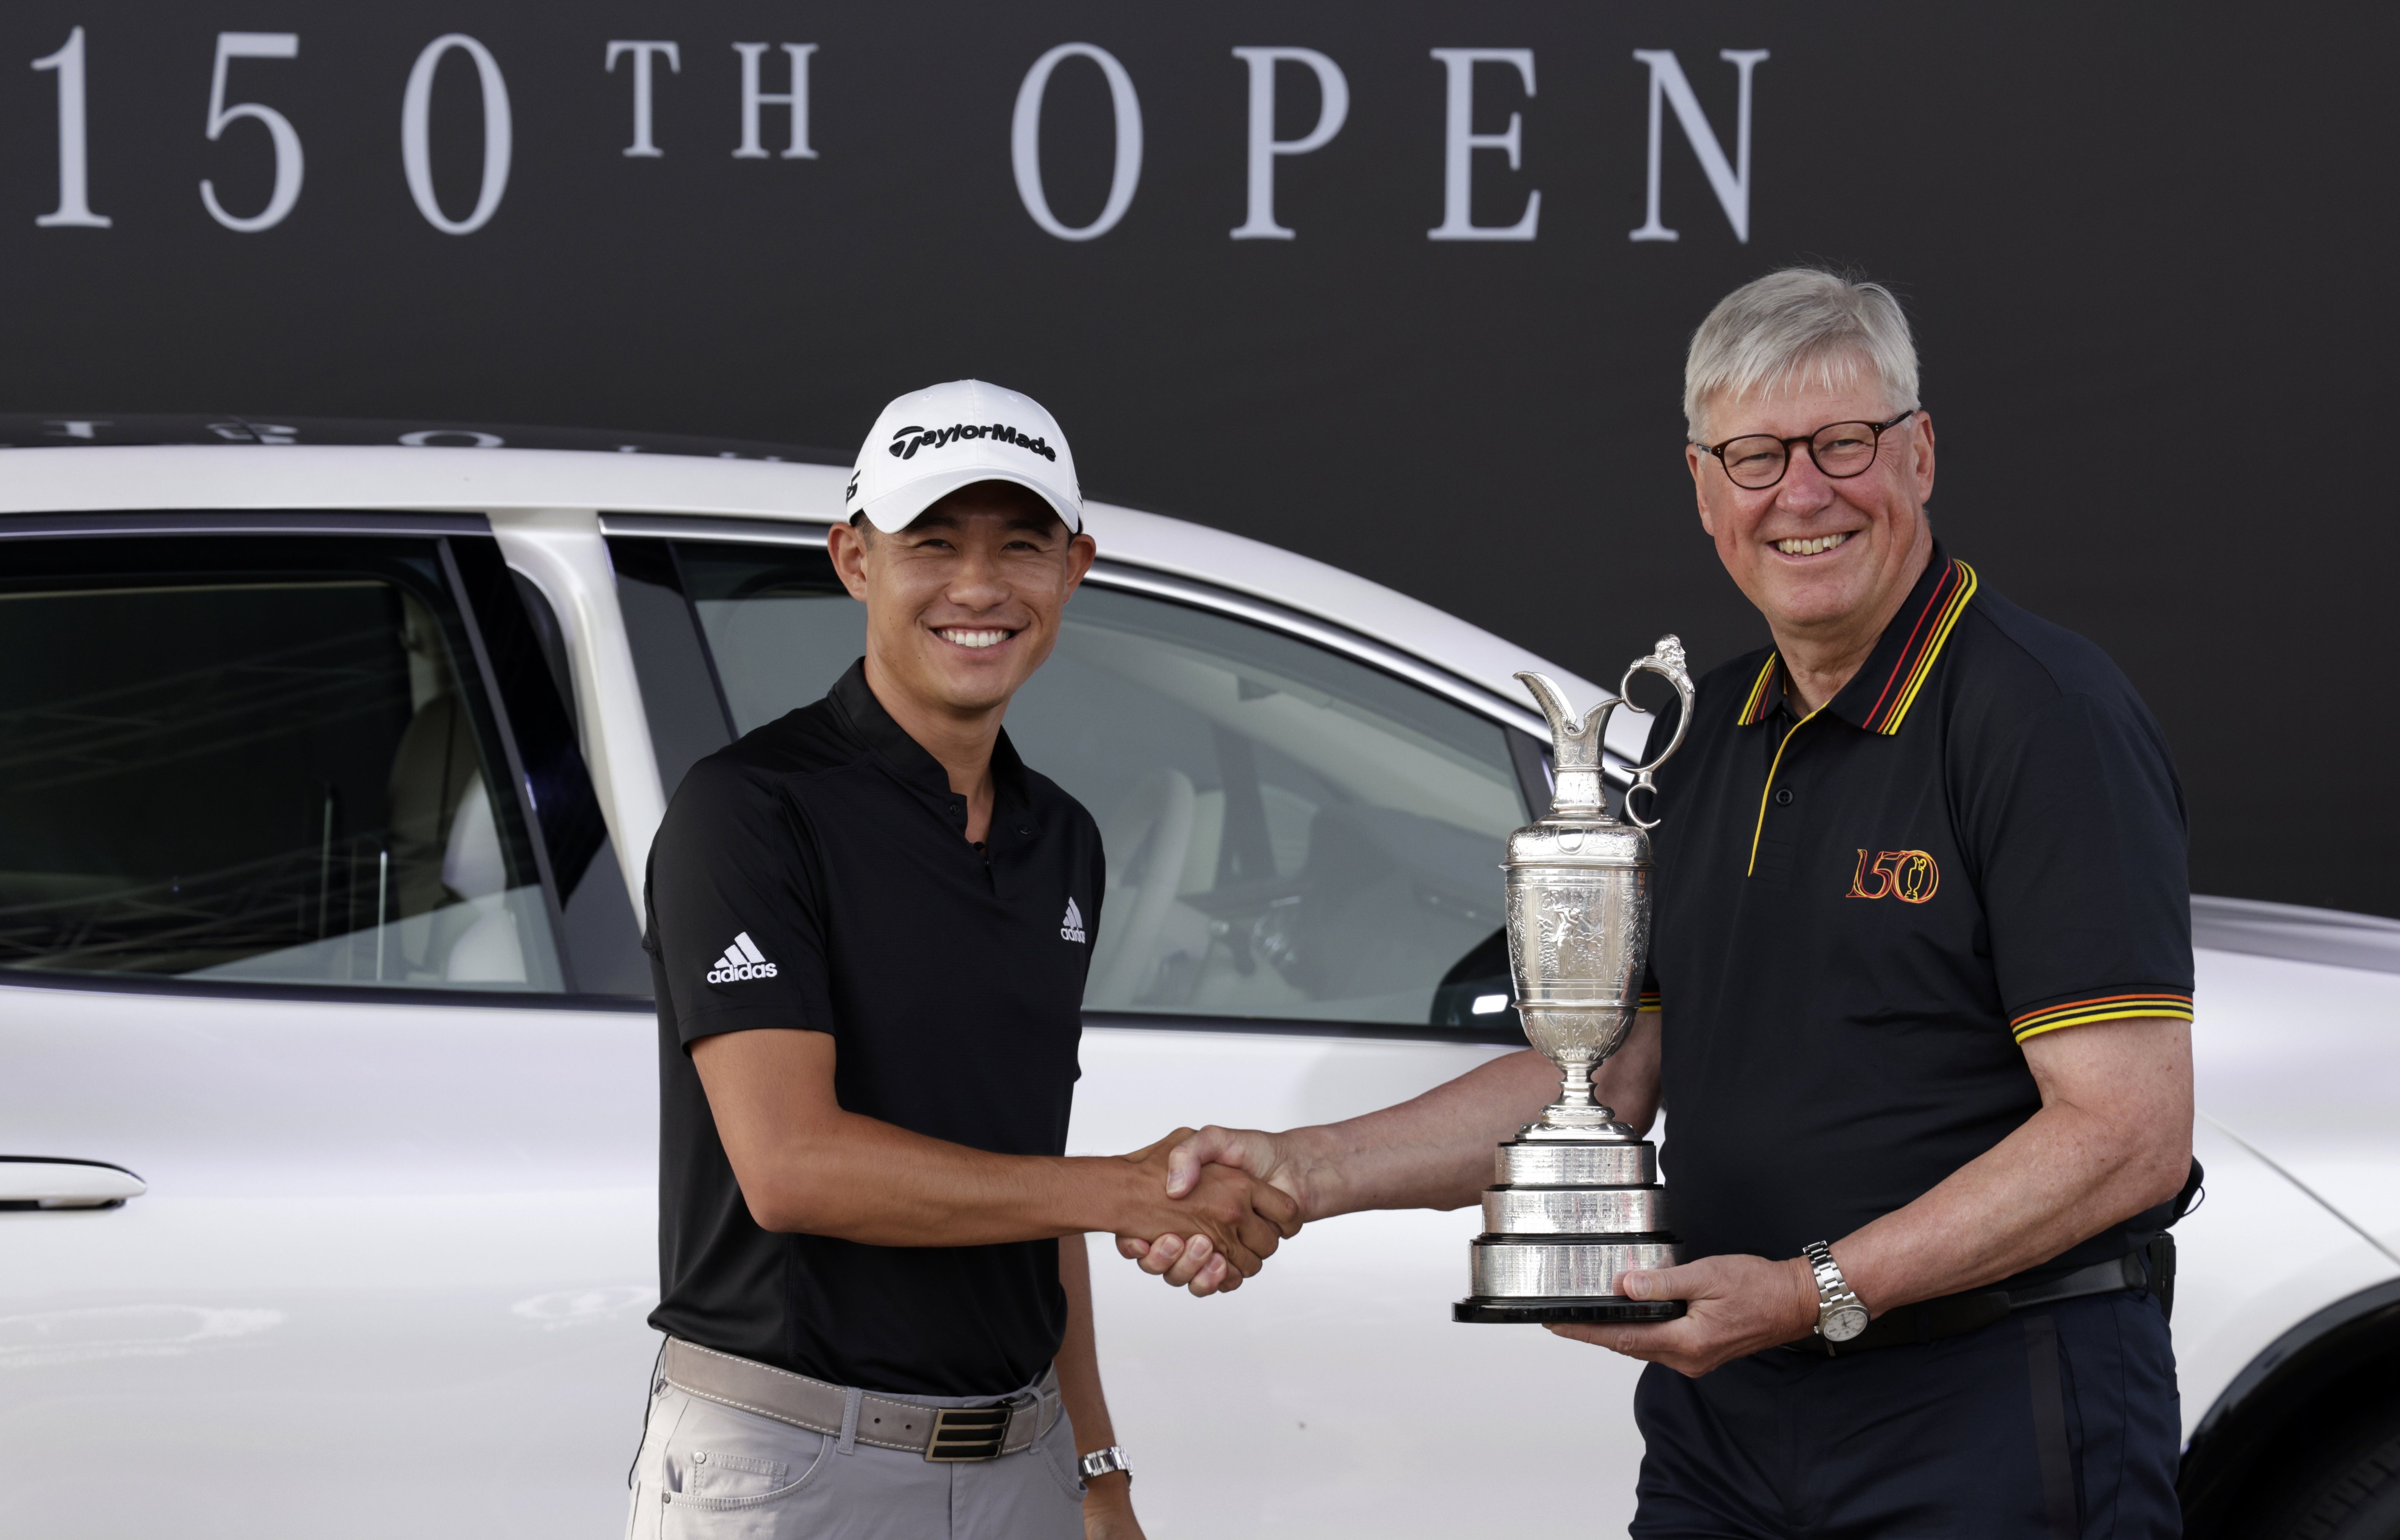 Collin Morikawa (left) returns the Claret Jug to R&A chief executive Martin Slumbers, ahead of The 150th Open Championship (Richard Sellers/PA)